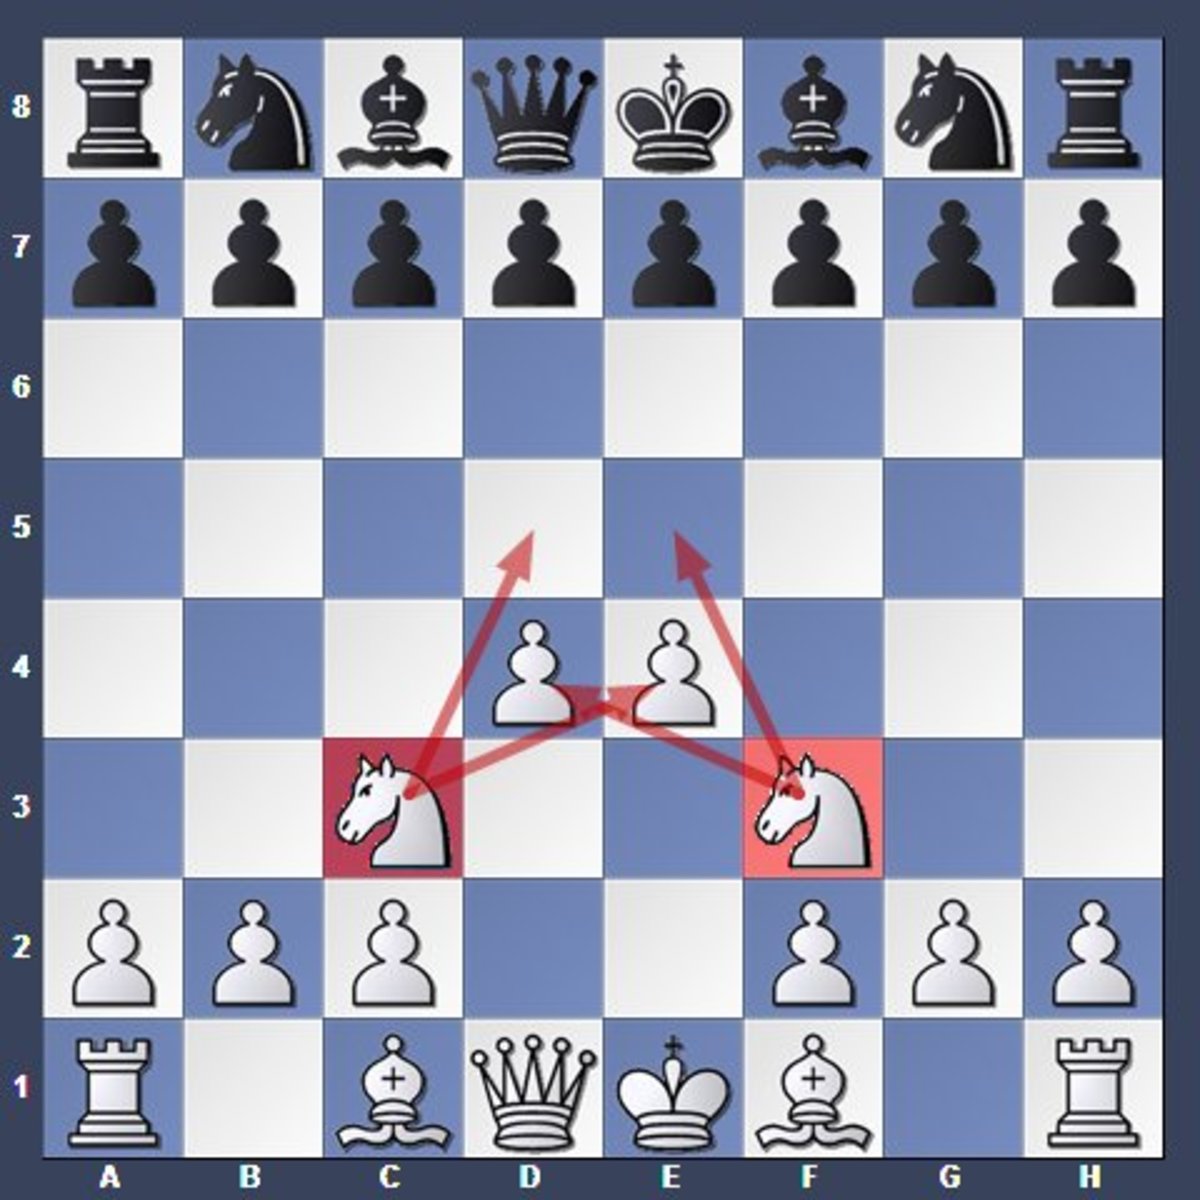 King's Pawn Opening Strategy